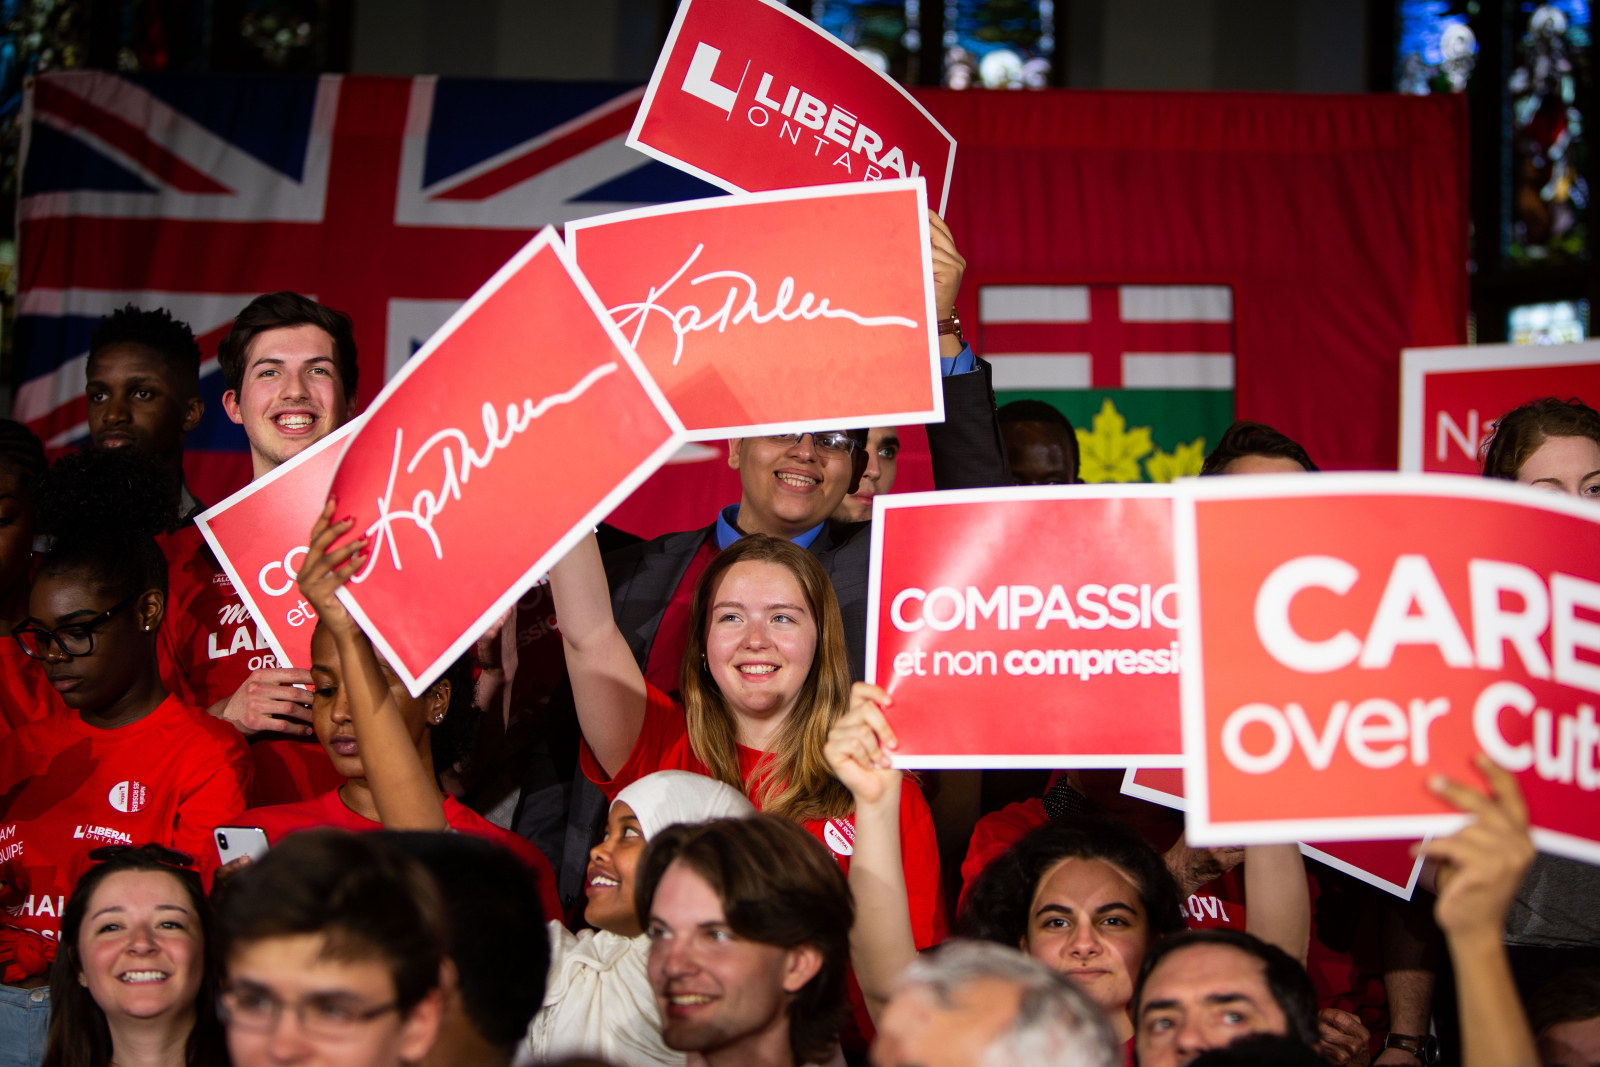 Ontario Liberal supporters hold up campaign signs, including 